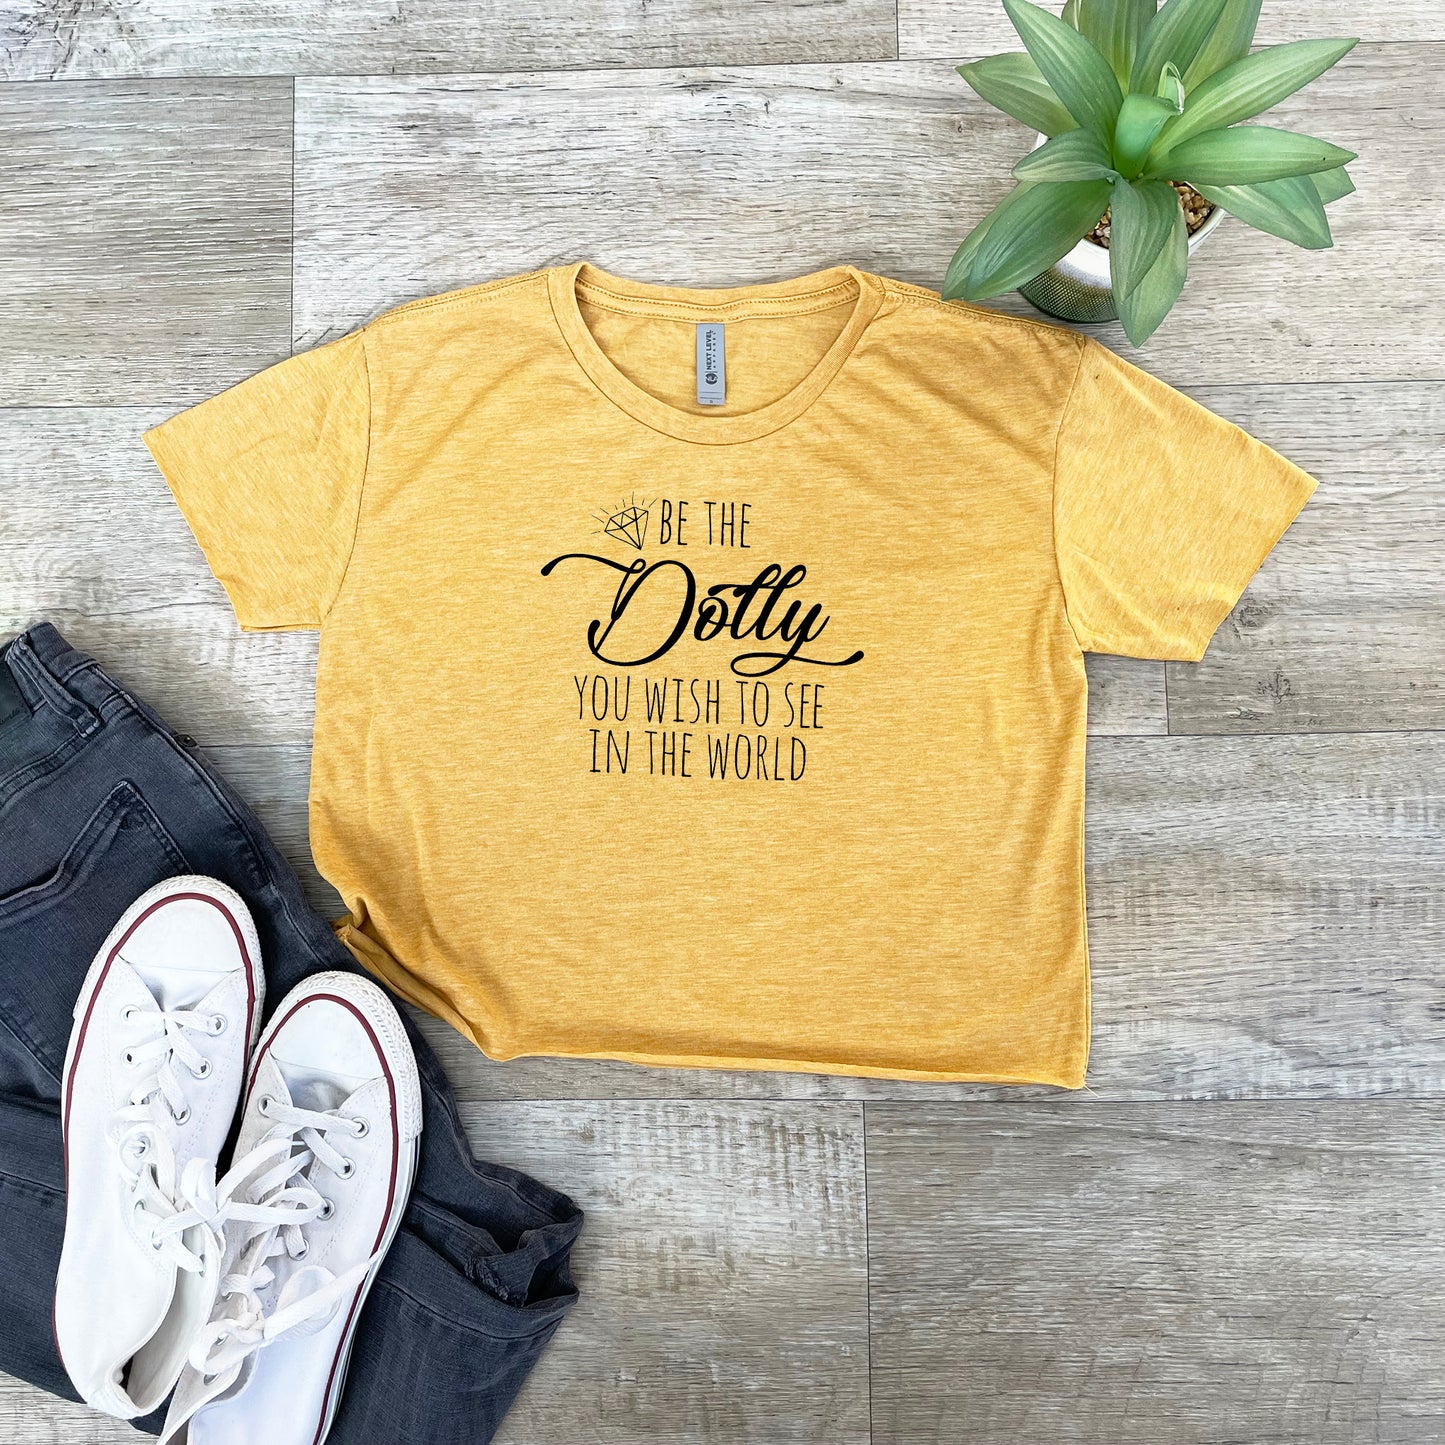 Be the Dolly You Wish to See in the World (Dolly Parton) - Women's Crop Tee - Heather Gray or Gold